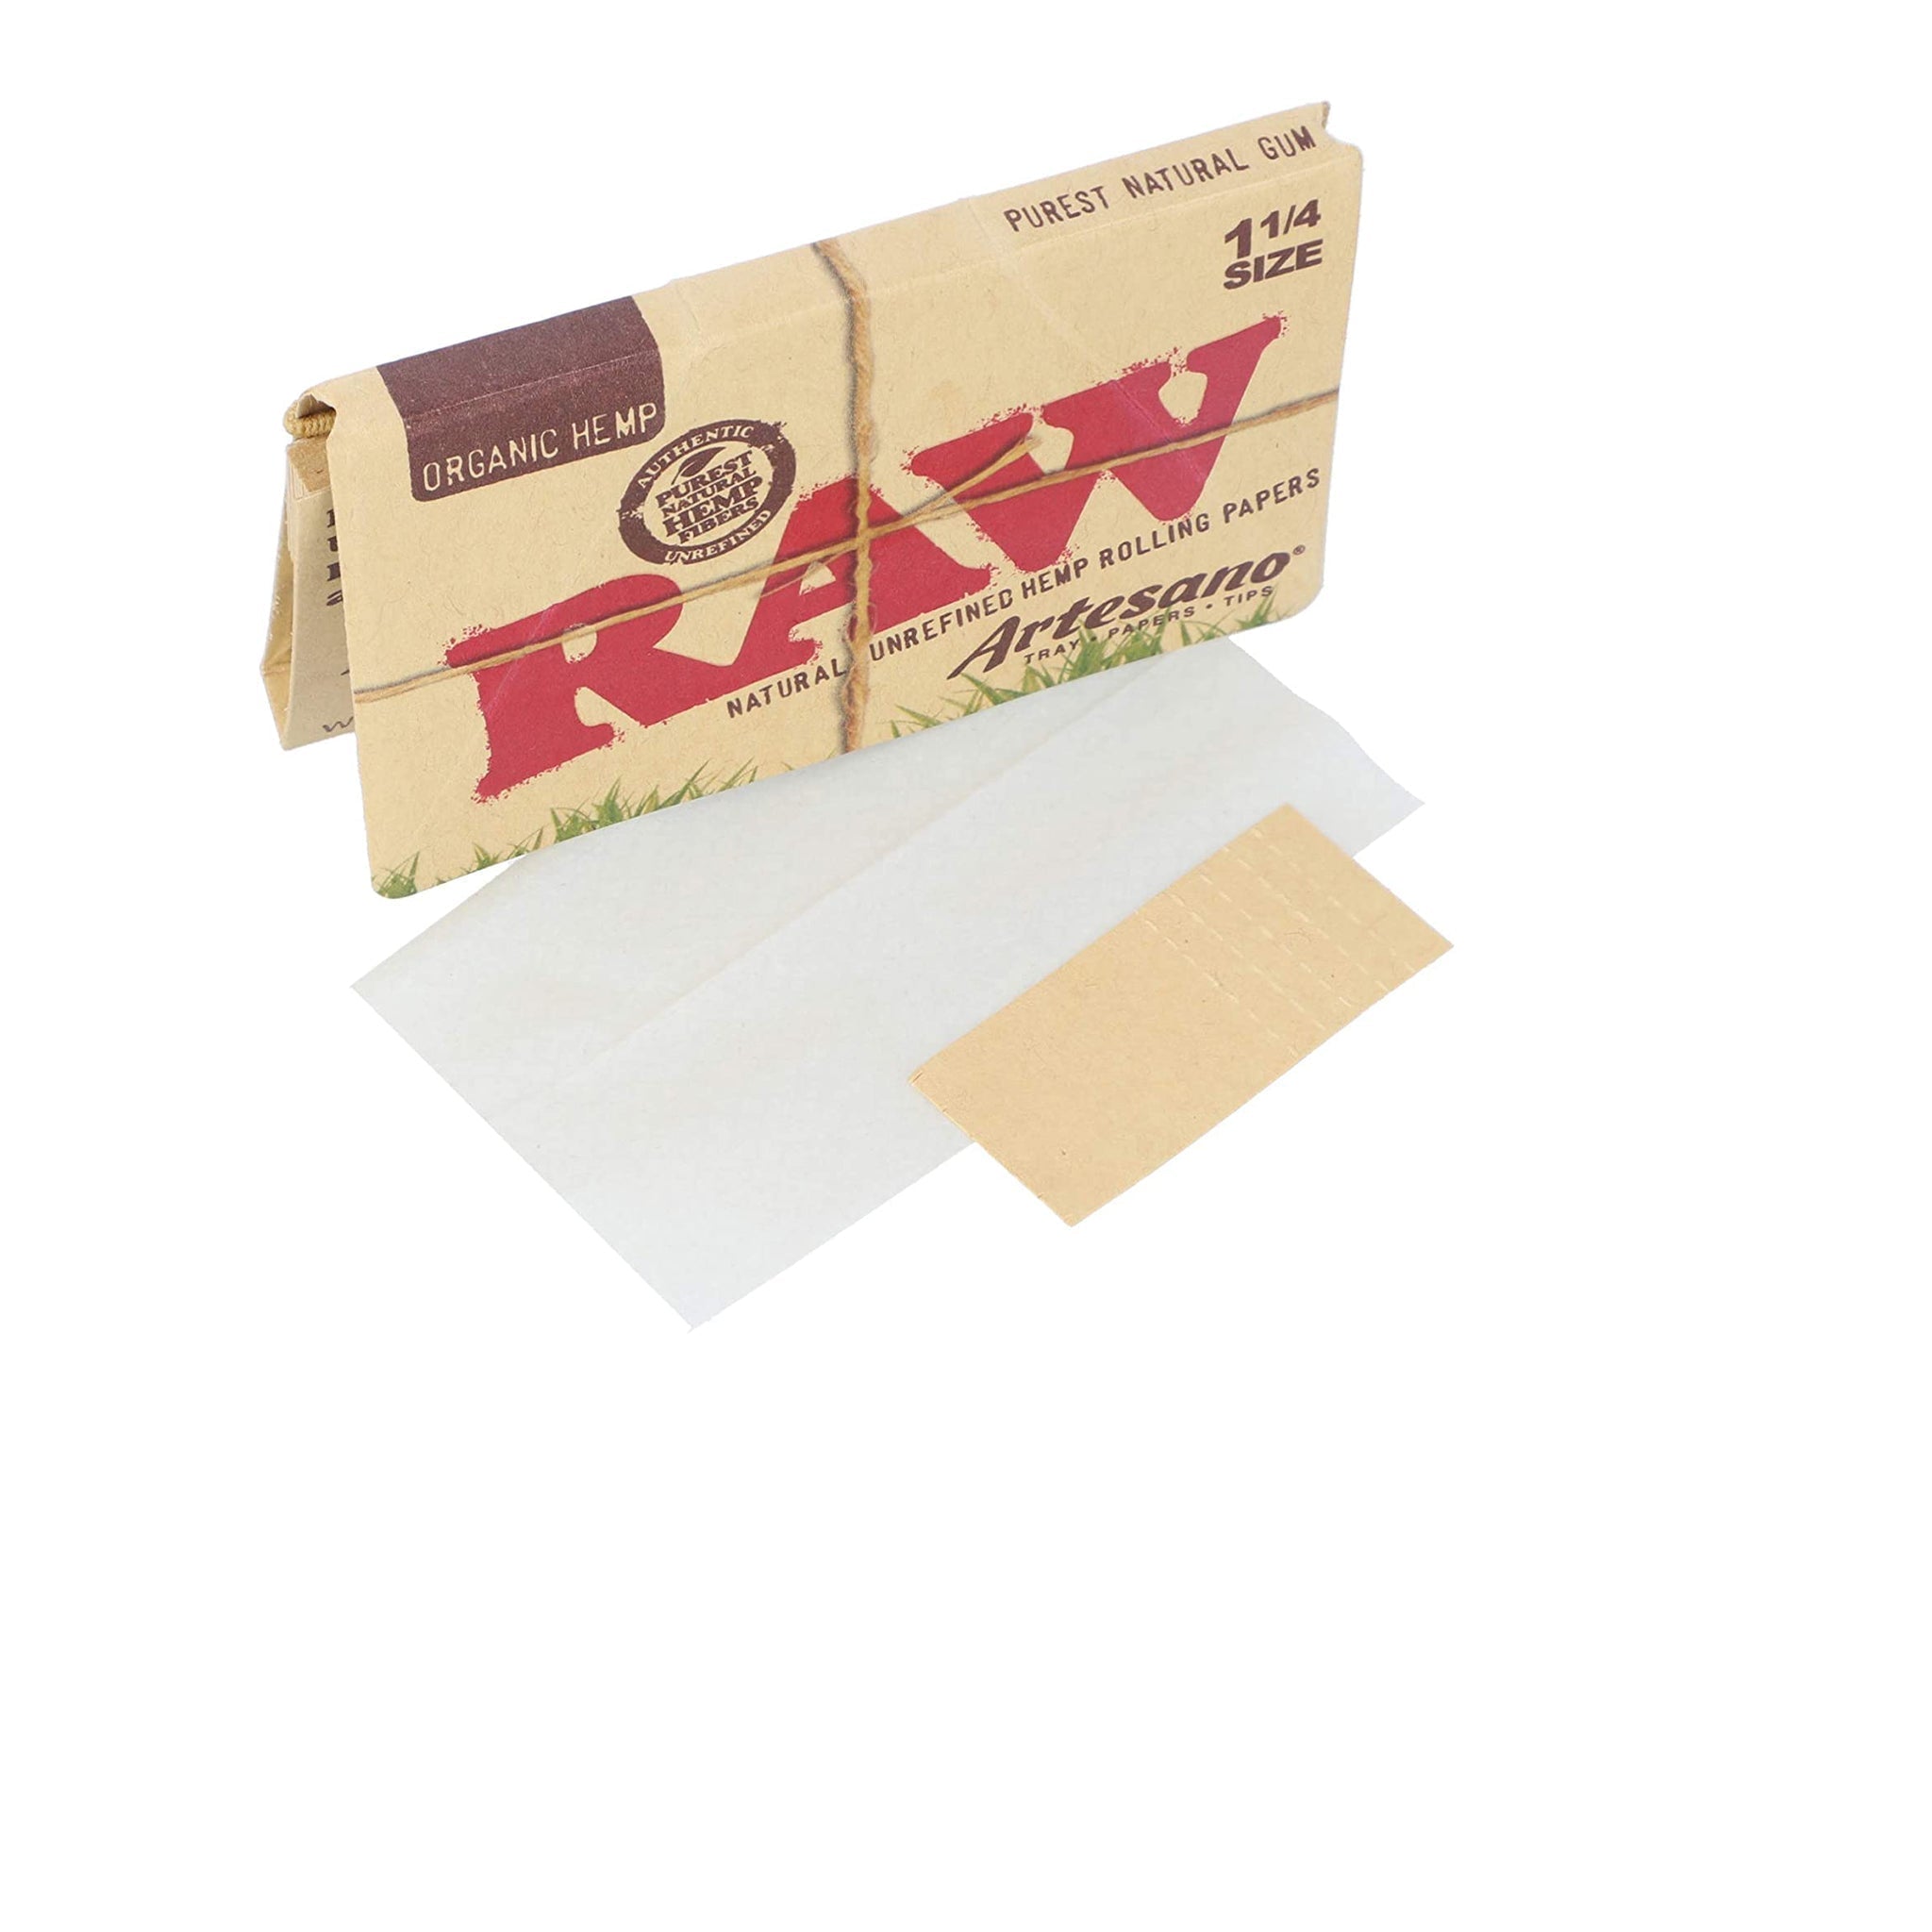 RAW Rolling Papers Organic Artesano 1 1/4 (2 Pack)